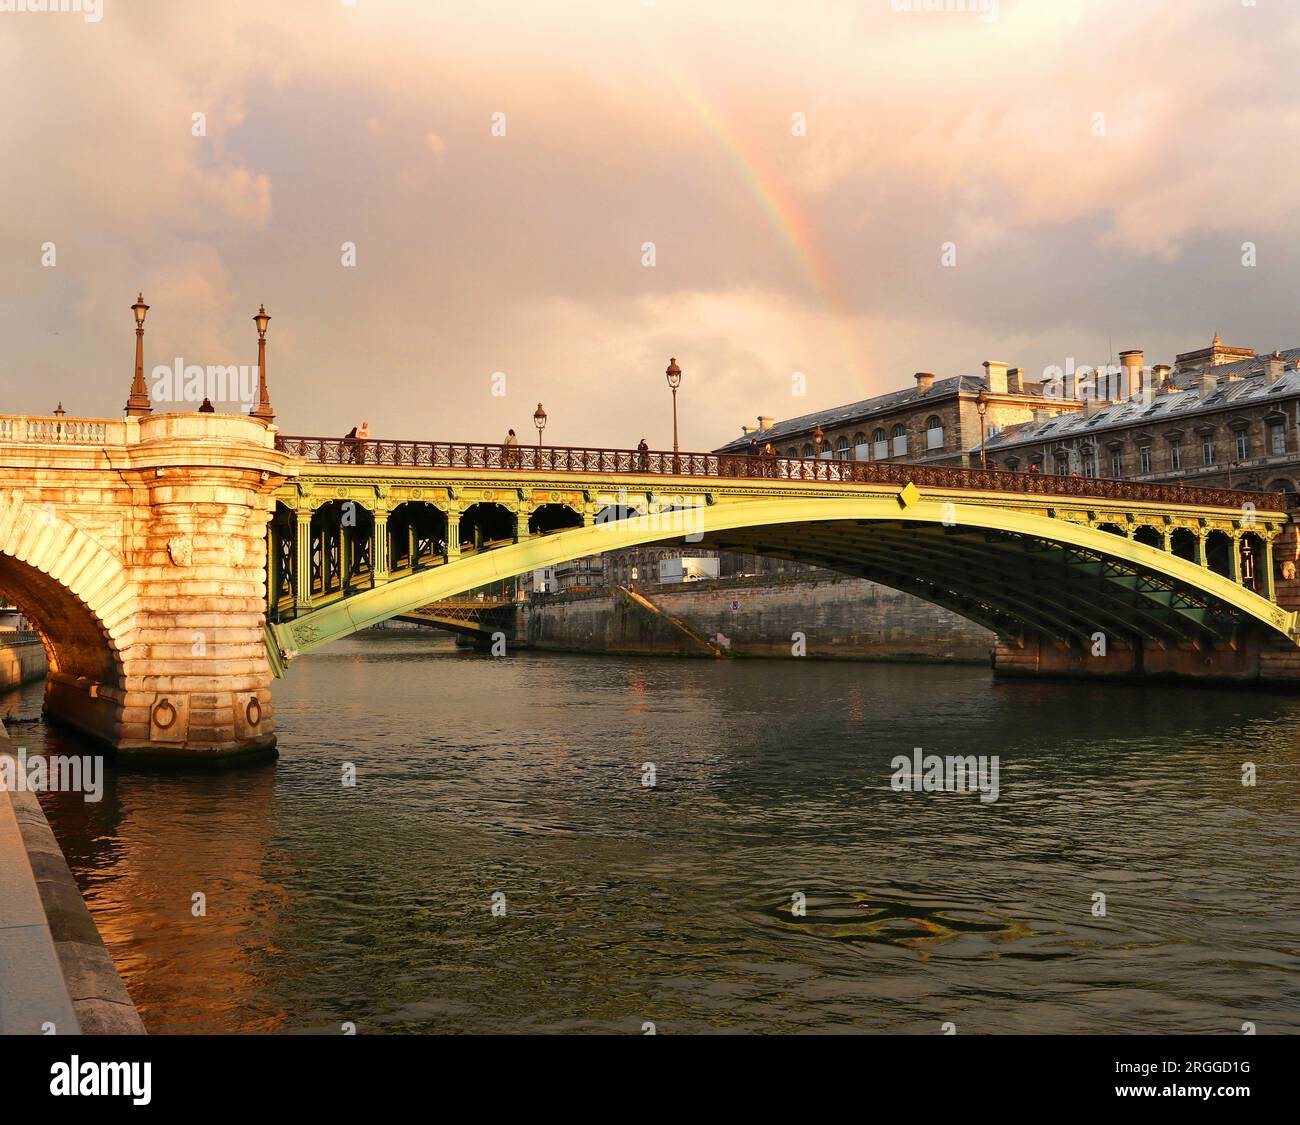 The green metal of the Pont Notre Dame, bridging the River Seine in Paris, glows in early evening golden light after heavy rain below a faint rainbow Stock Photo